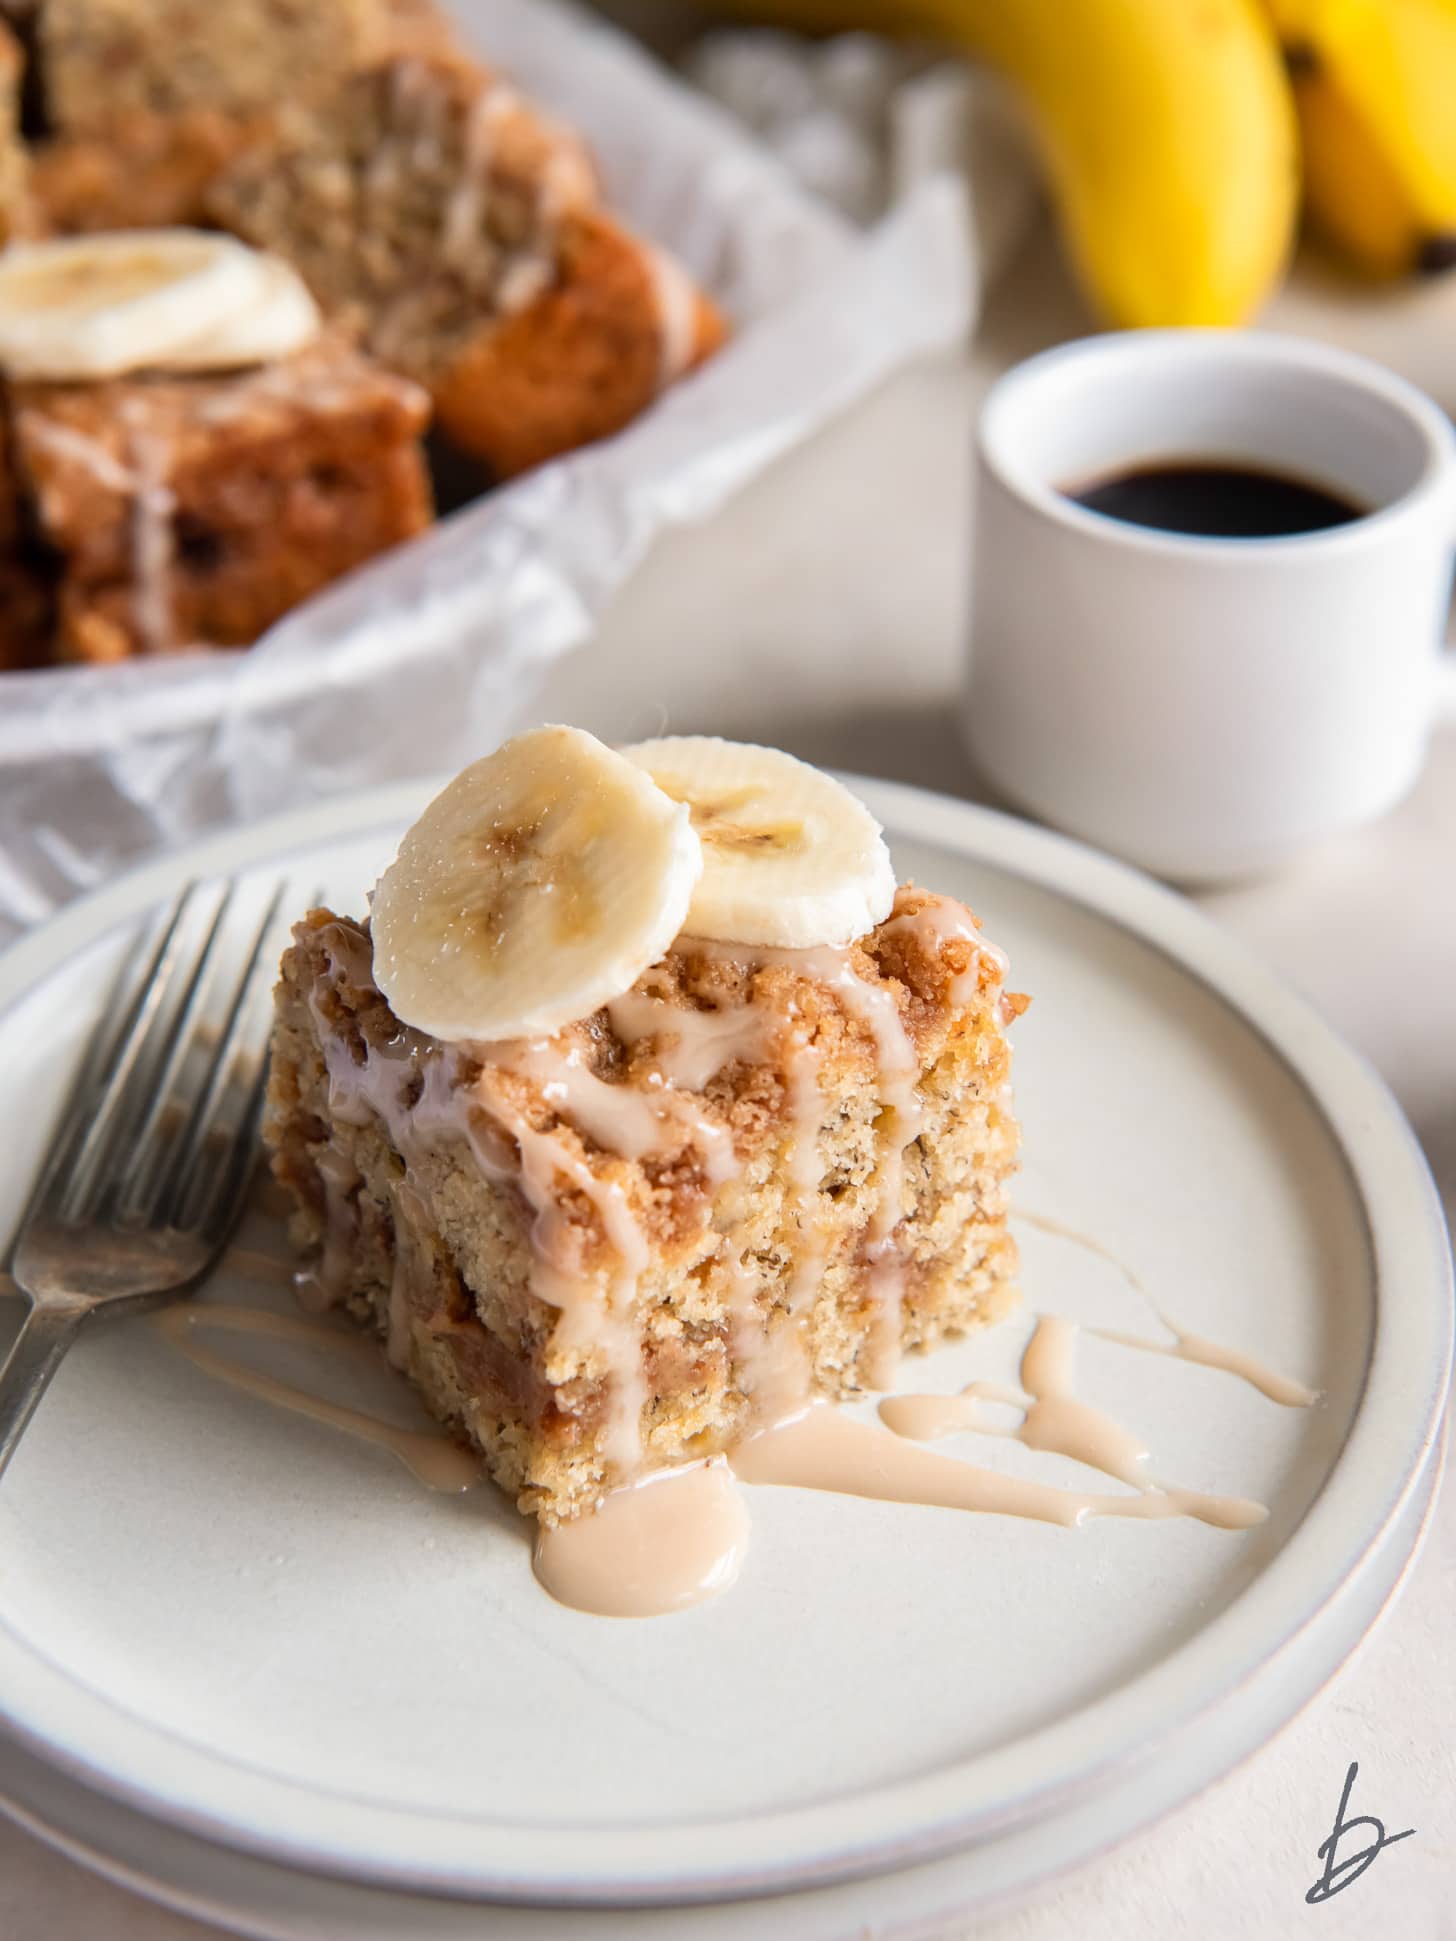 banana bread coffee cake slice with drizzle and banana slices on plate.